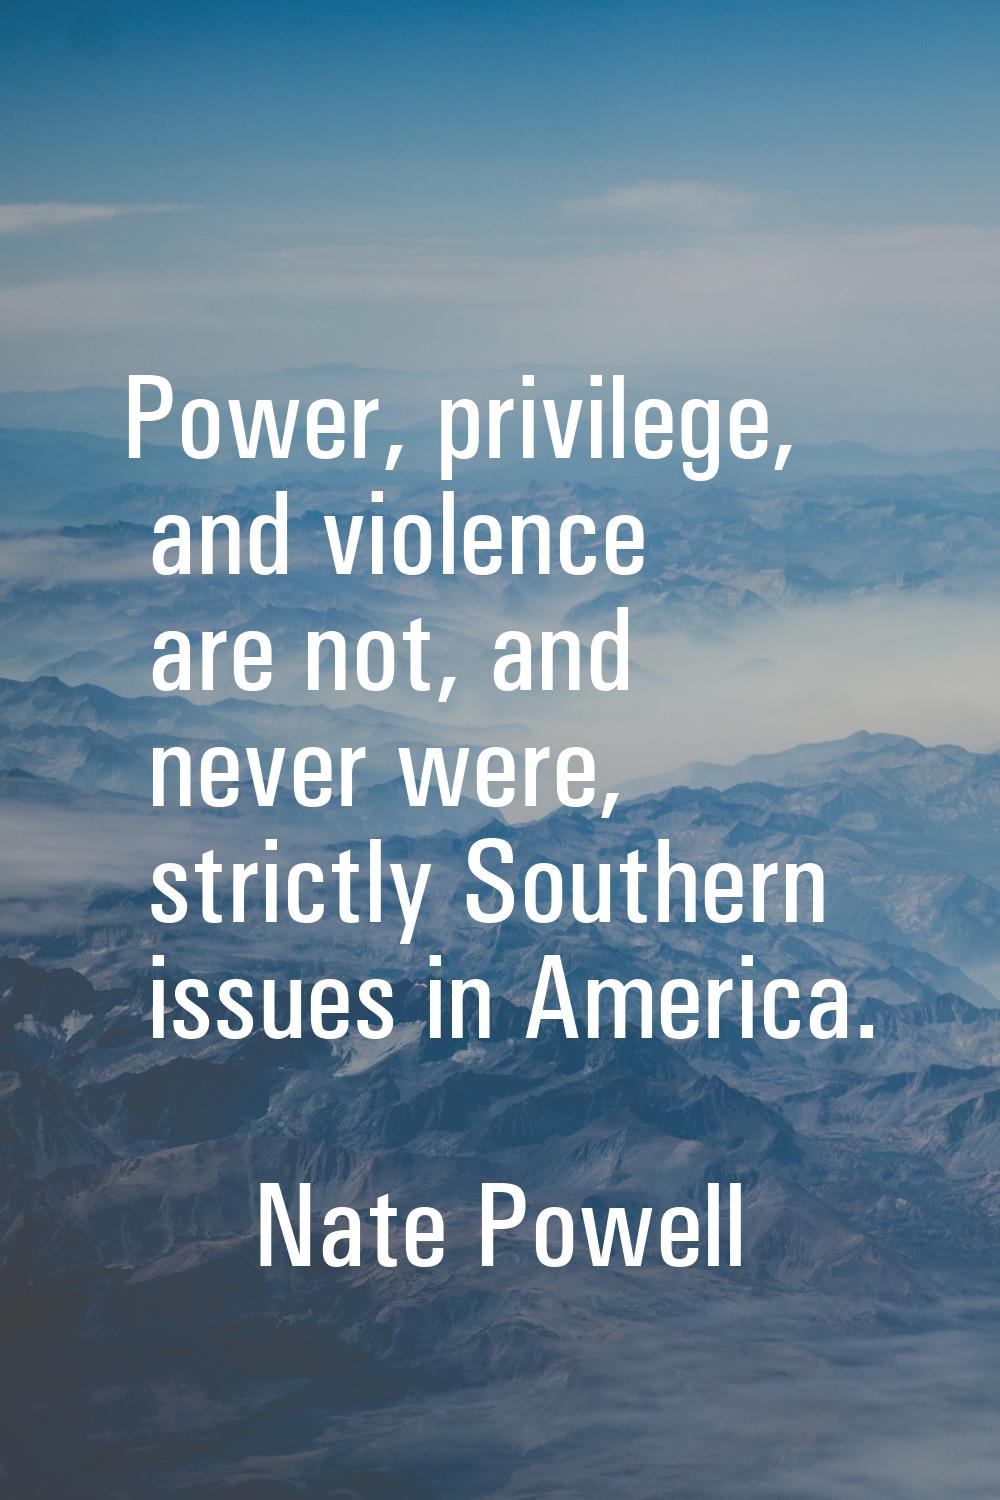 Power, privilege, and violence are not, and never were, strictly Southern issues in America.